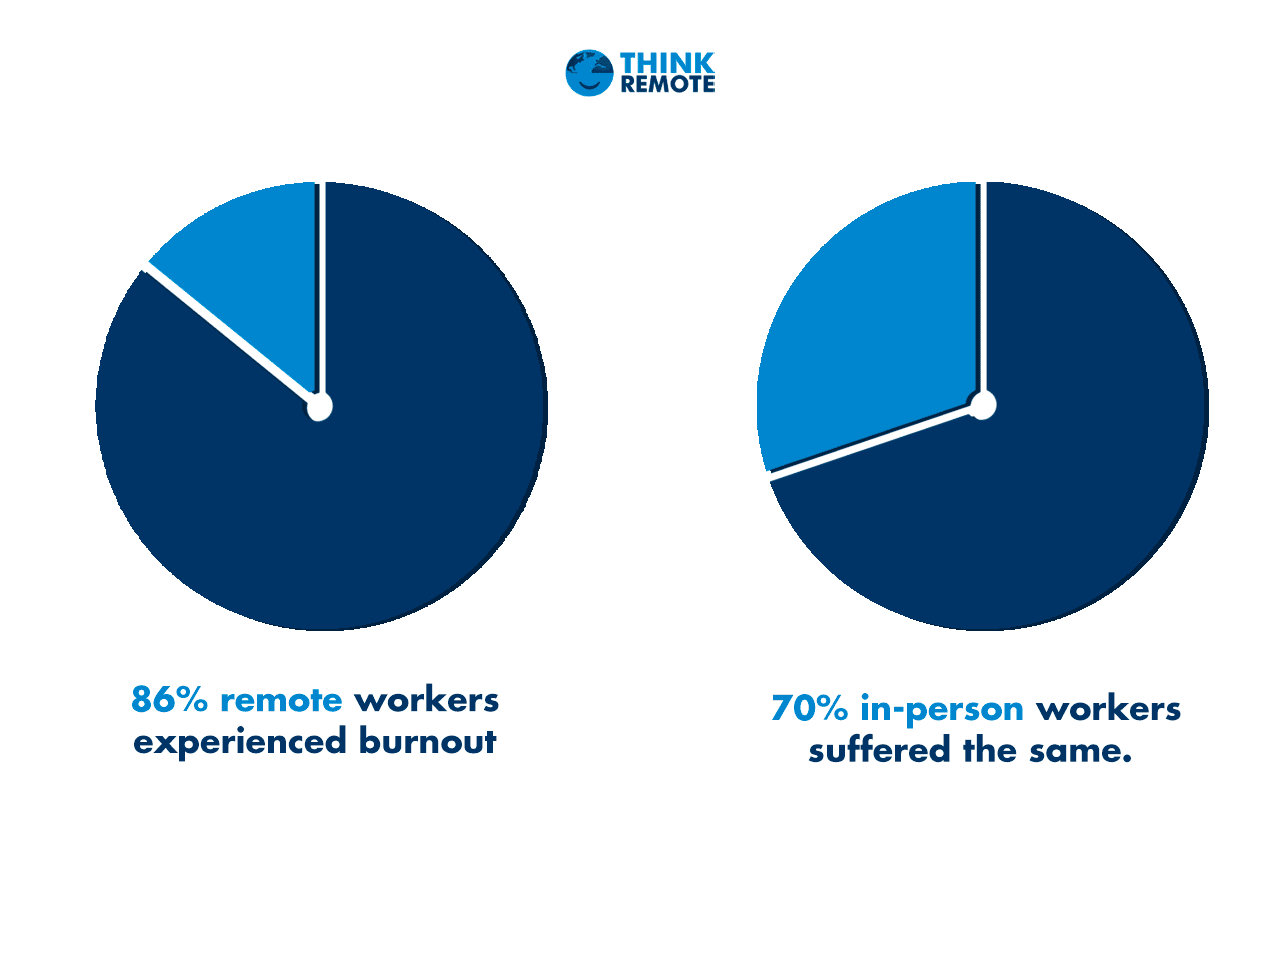 86% of remote workers experienced burnout, compared to 70% of in-person workers.